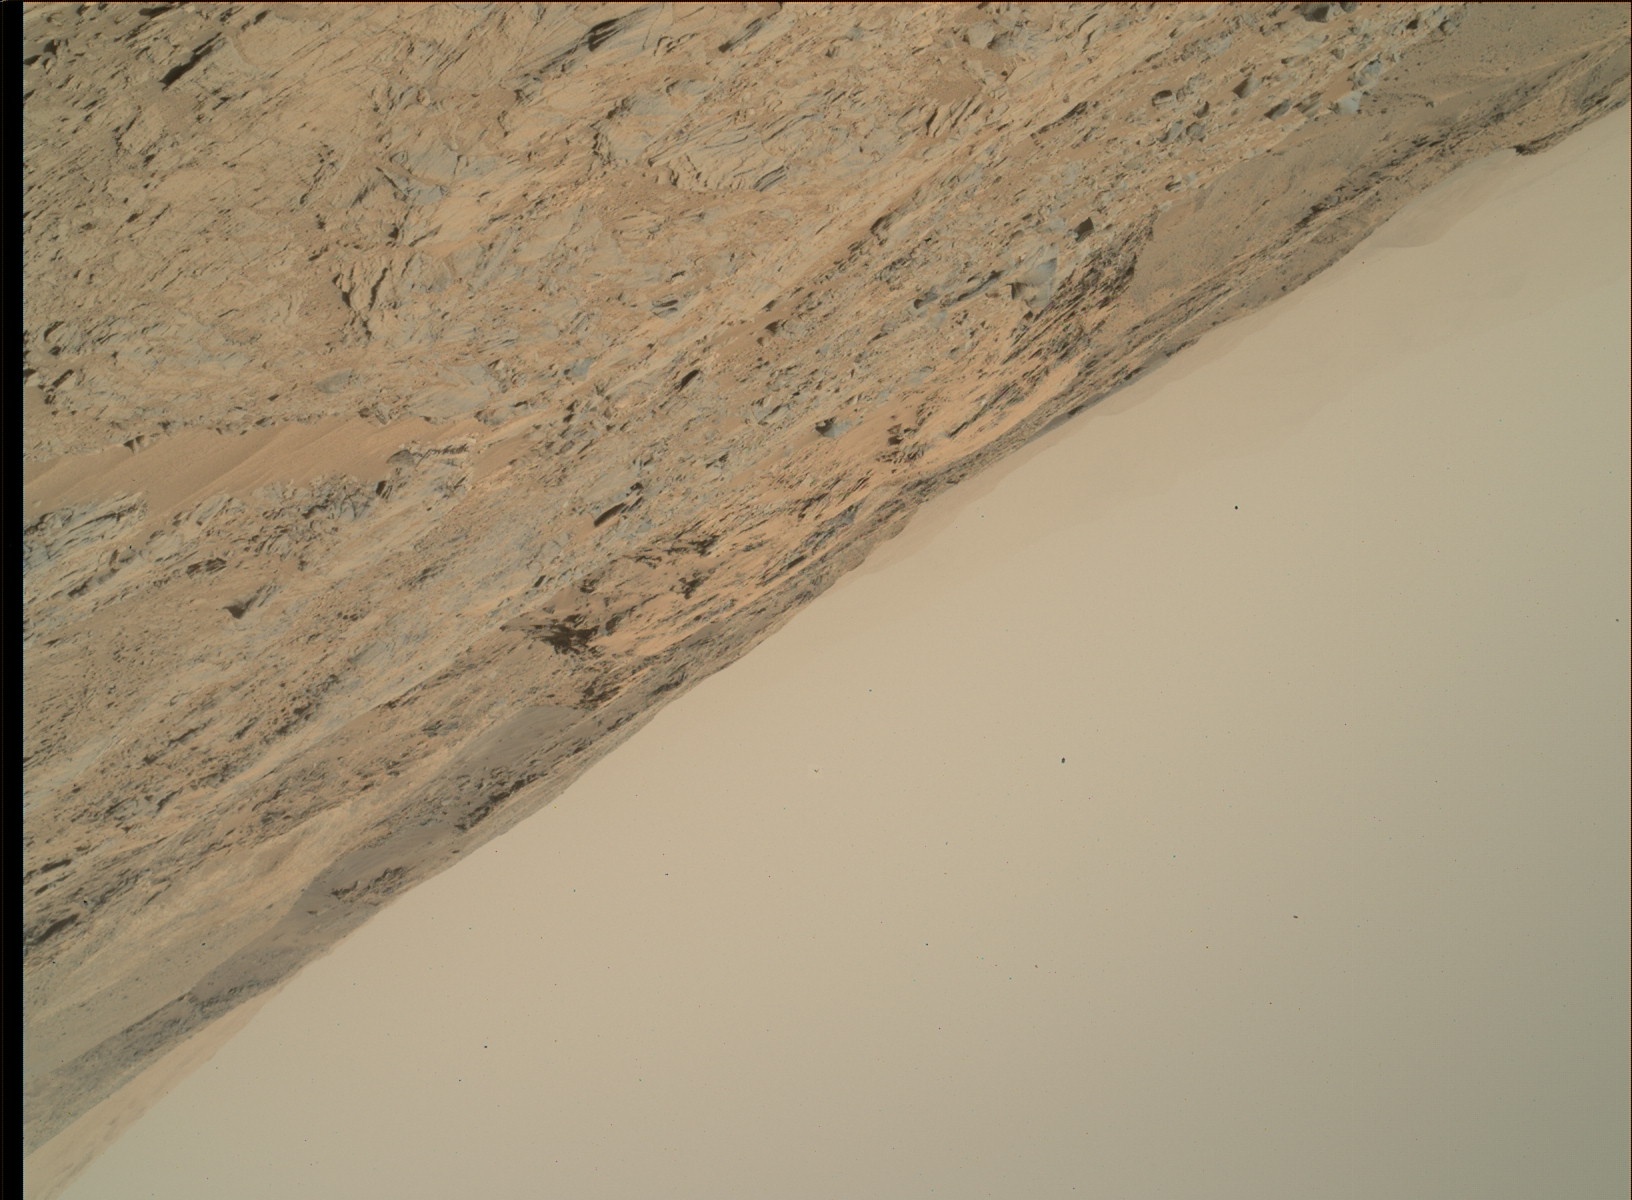 Nasa's Mars rover Curiosity acquired this image using its Mars Hand Lens Imager (MAHLI) on Sol 1098